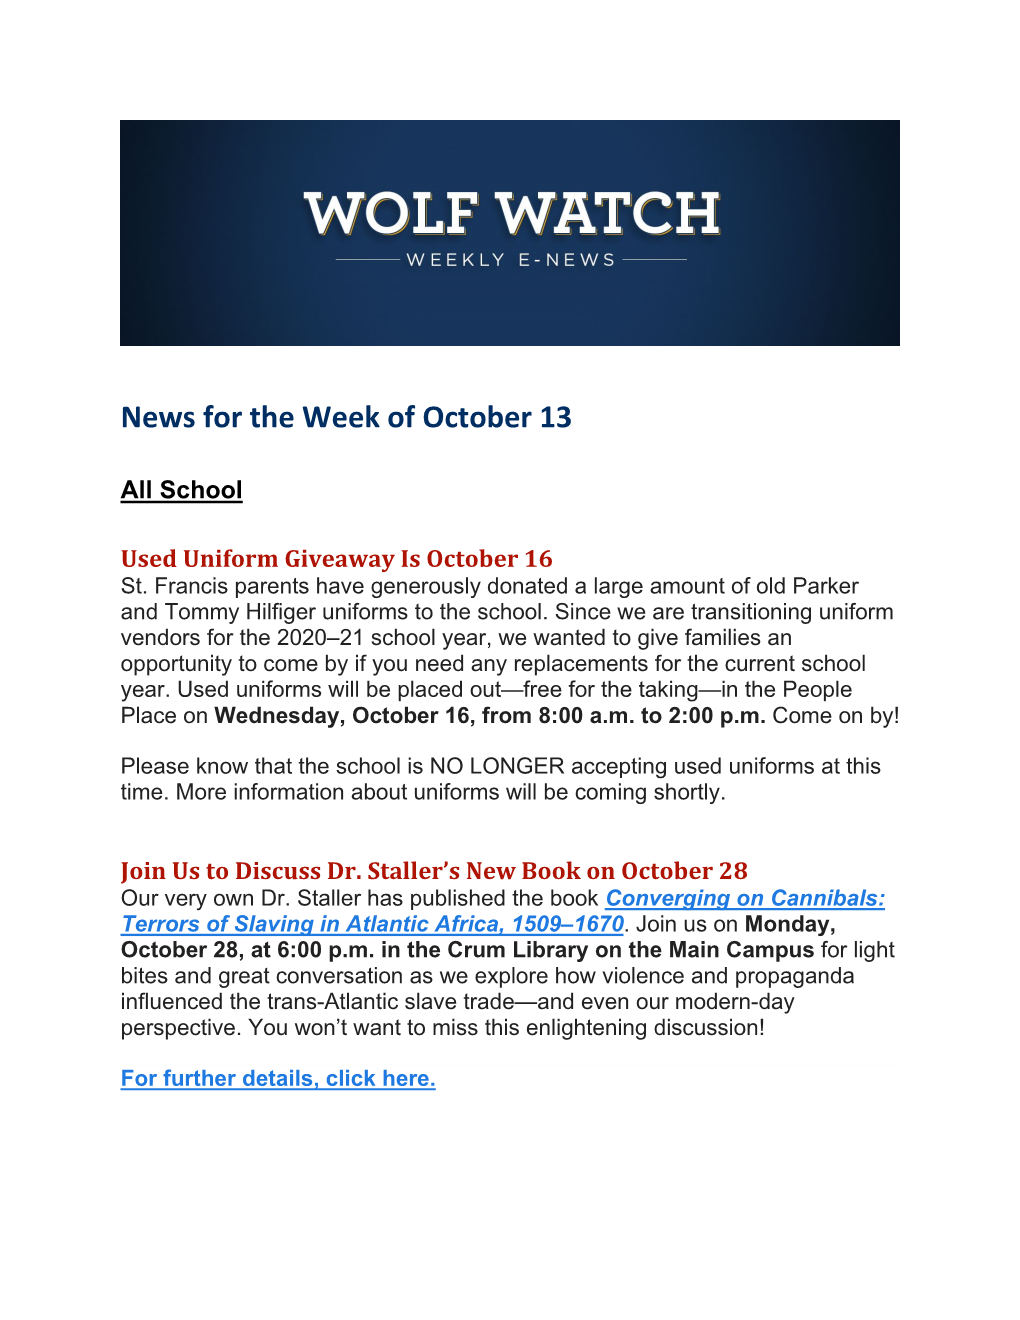 News for the Week of October 13